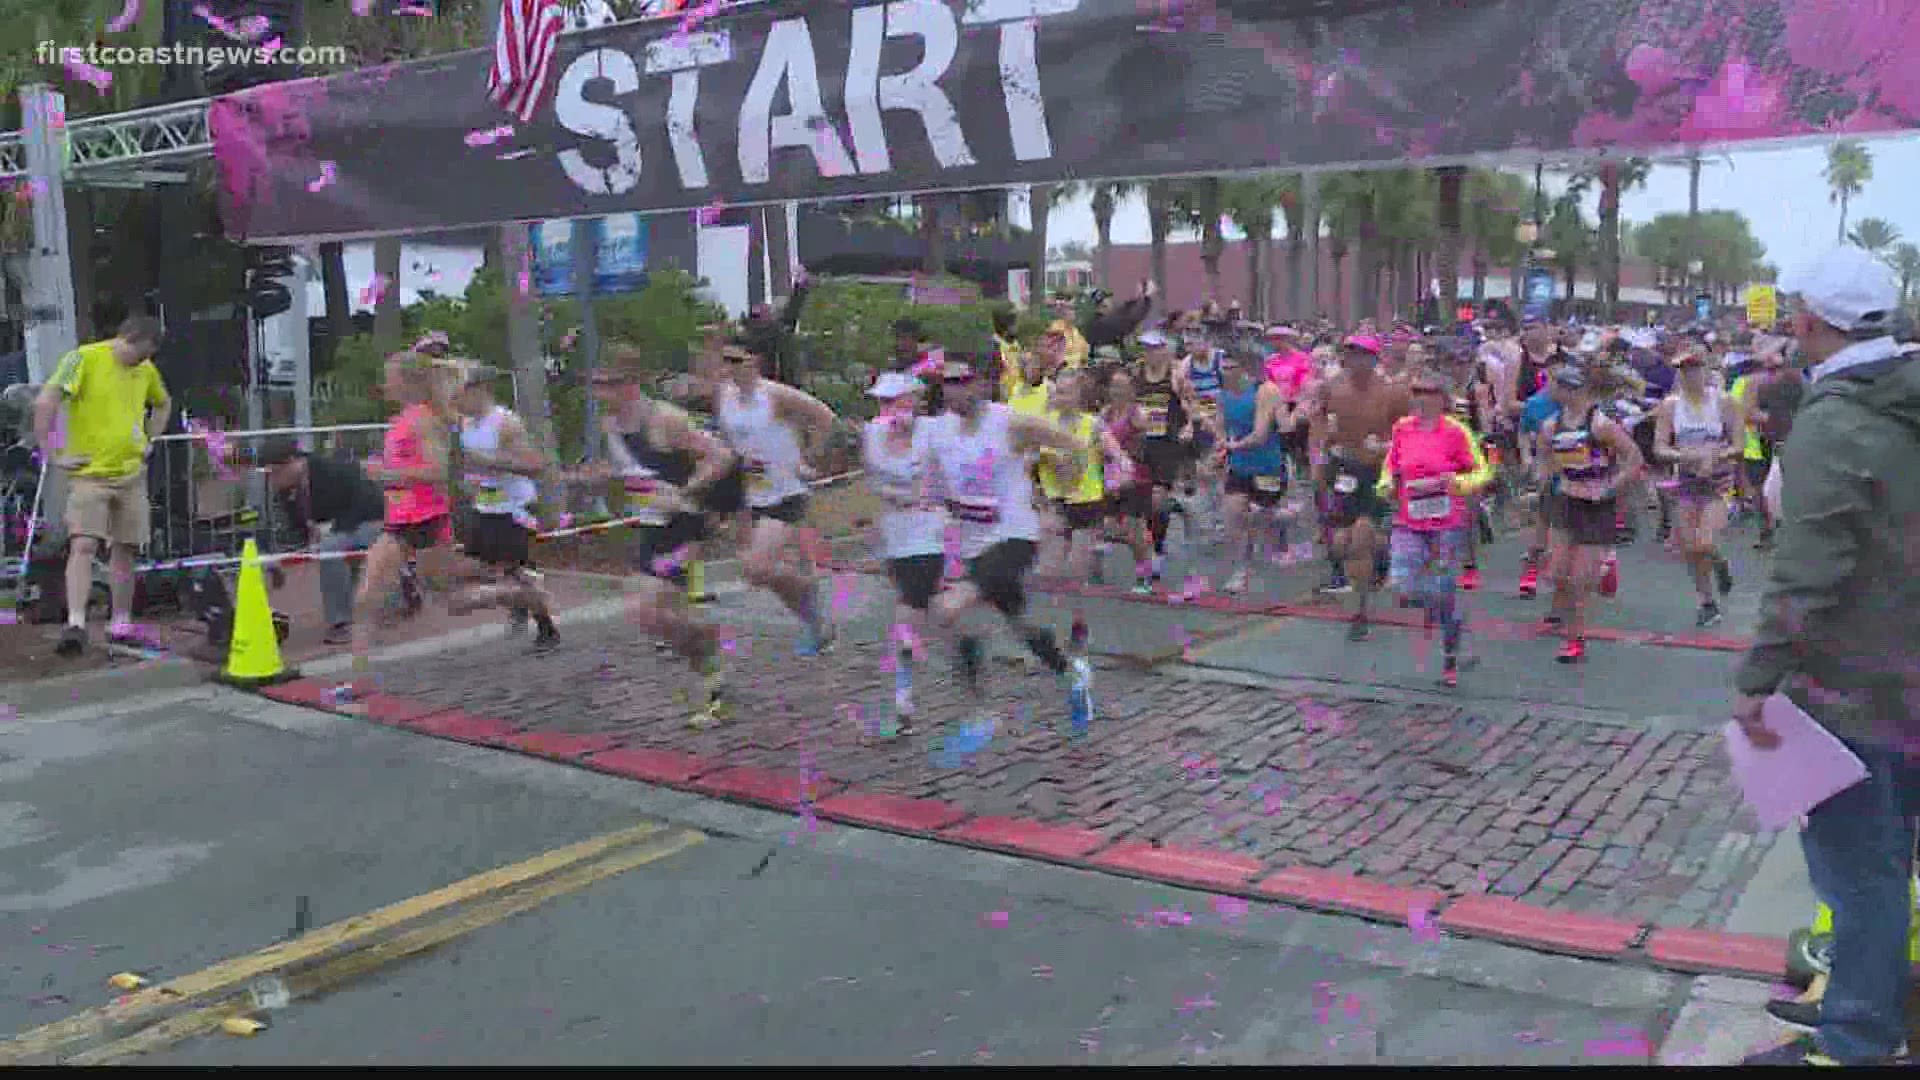 The annual Donna Marathon raises money for breast cancer research and support.